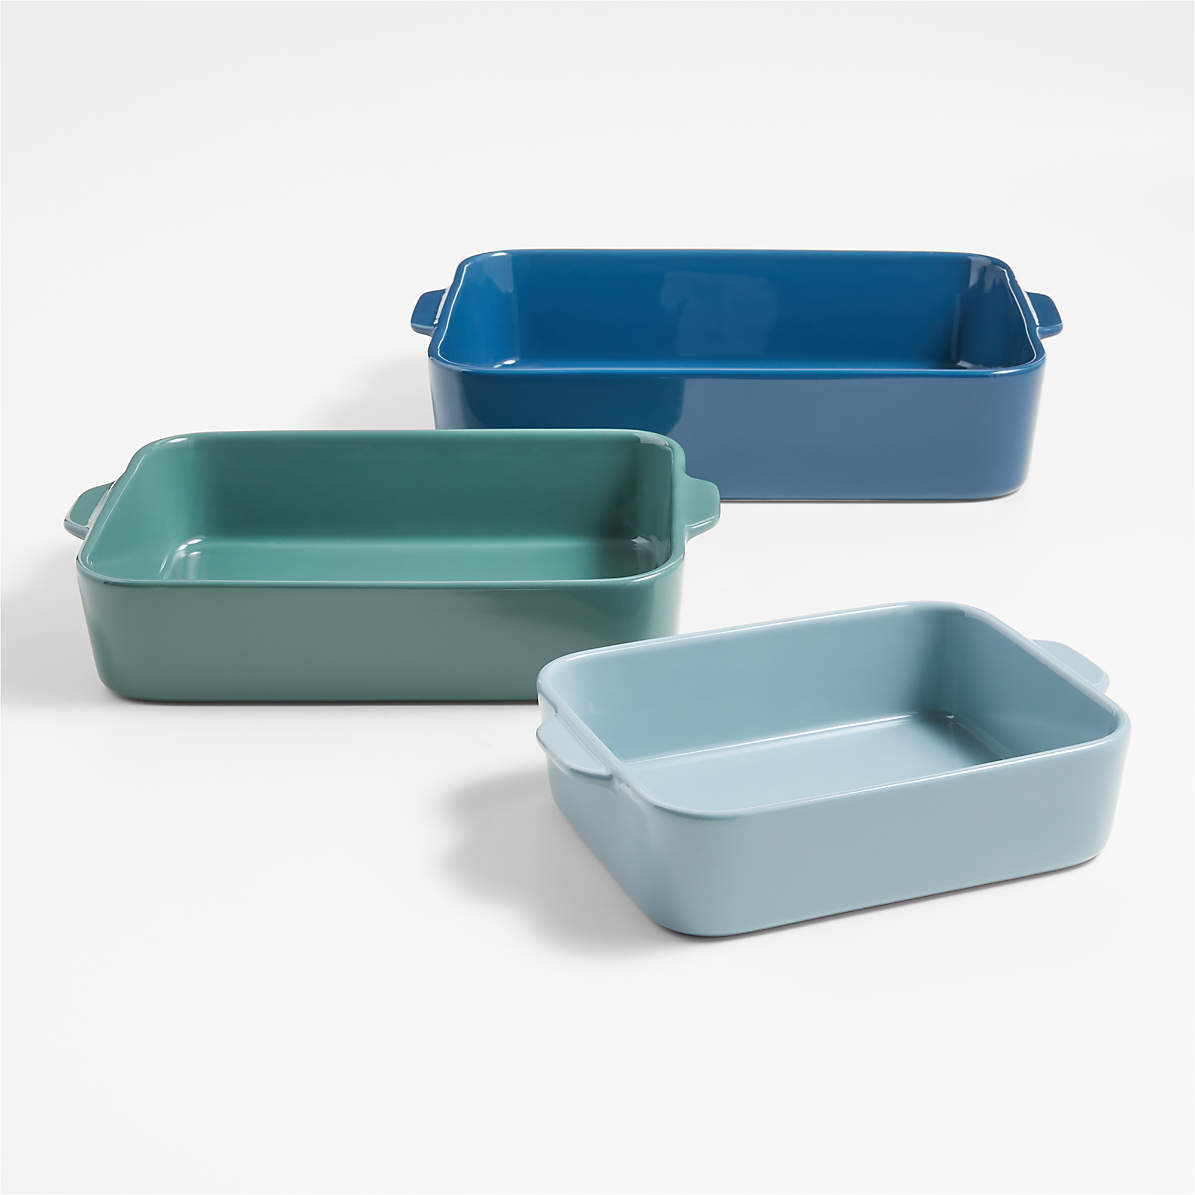 Maeve Multi-Colored Ceramic Measuring Cups and Spoons